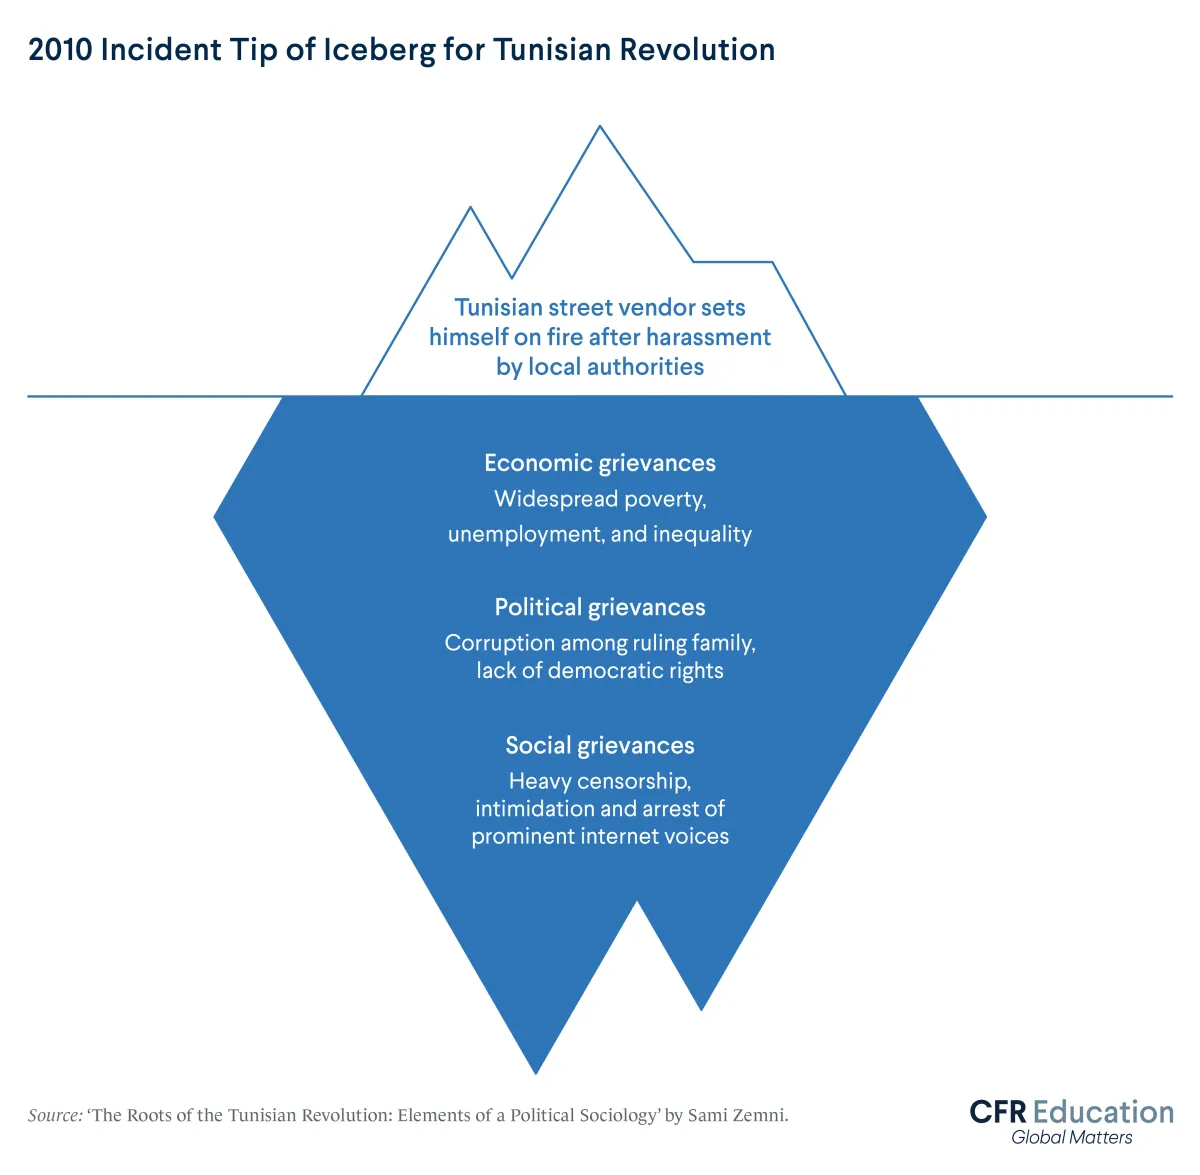 Illustration of an iceberg representing how the Tunisian man setting himself on fire in 2010 was just the 'tip of the iceberg' of Tunisian grievances. Many were upset about other economic and political issues. For more info contact cfr_education@cfr.org.